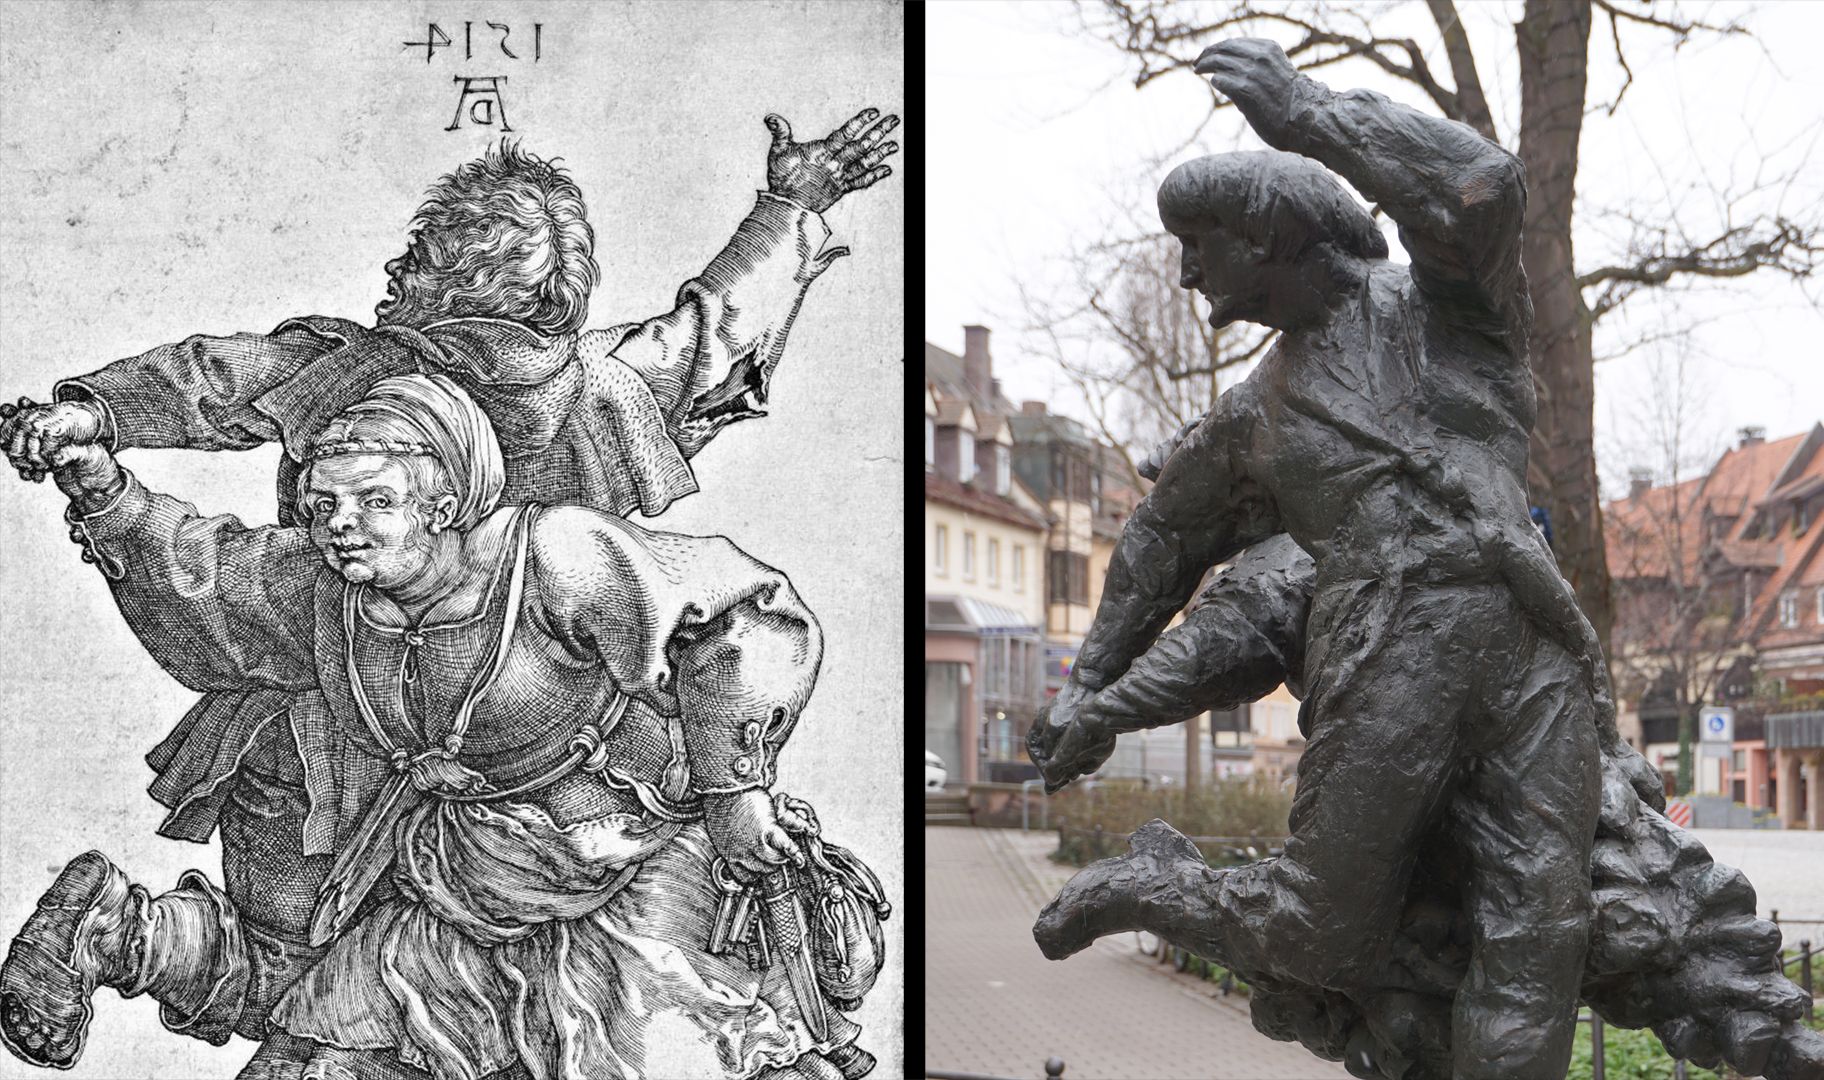 Dancing peasant couple Image comparison: copperplate engraving (here mirrored horizontally) by Dürer from 1514 with the finished sculpture.